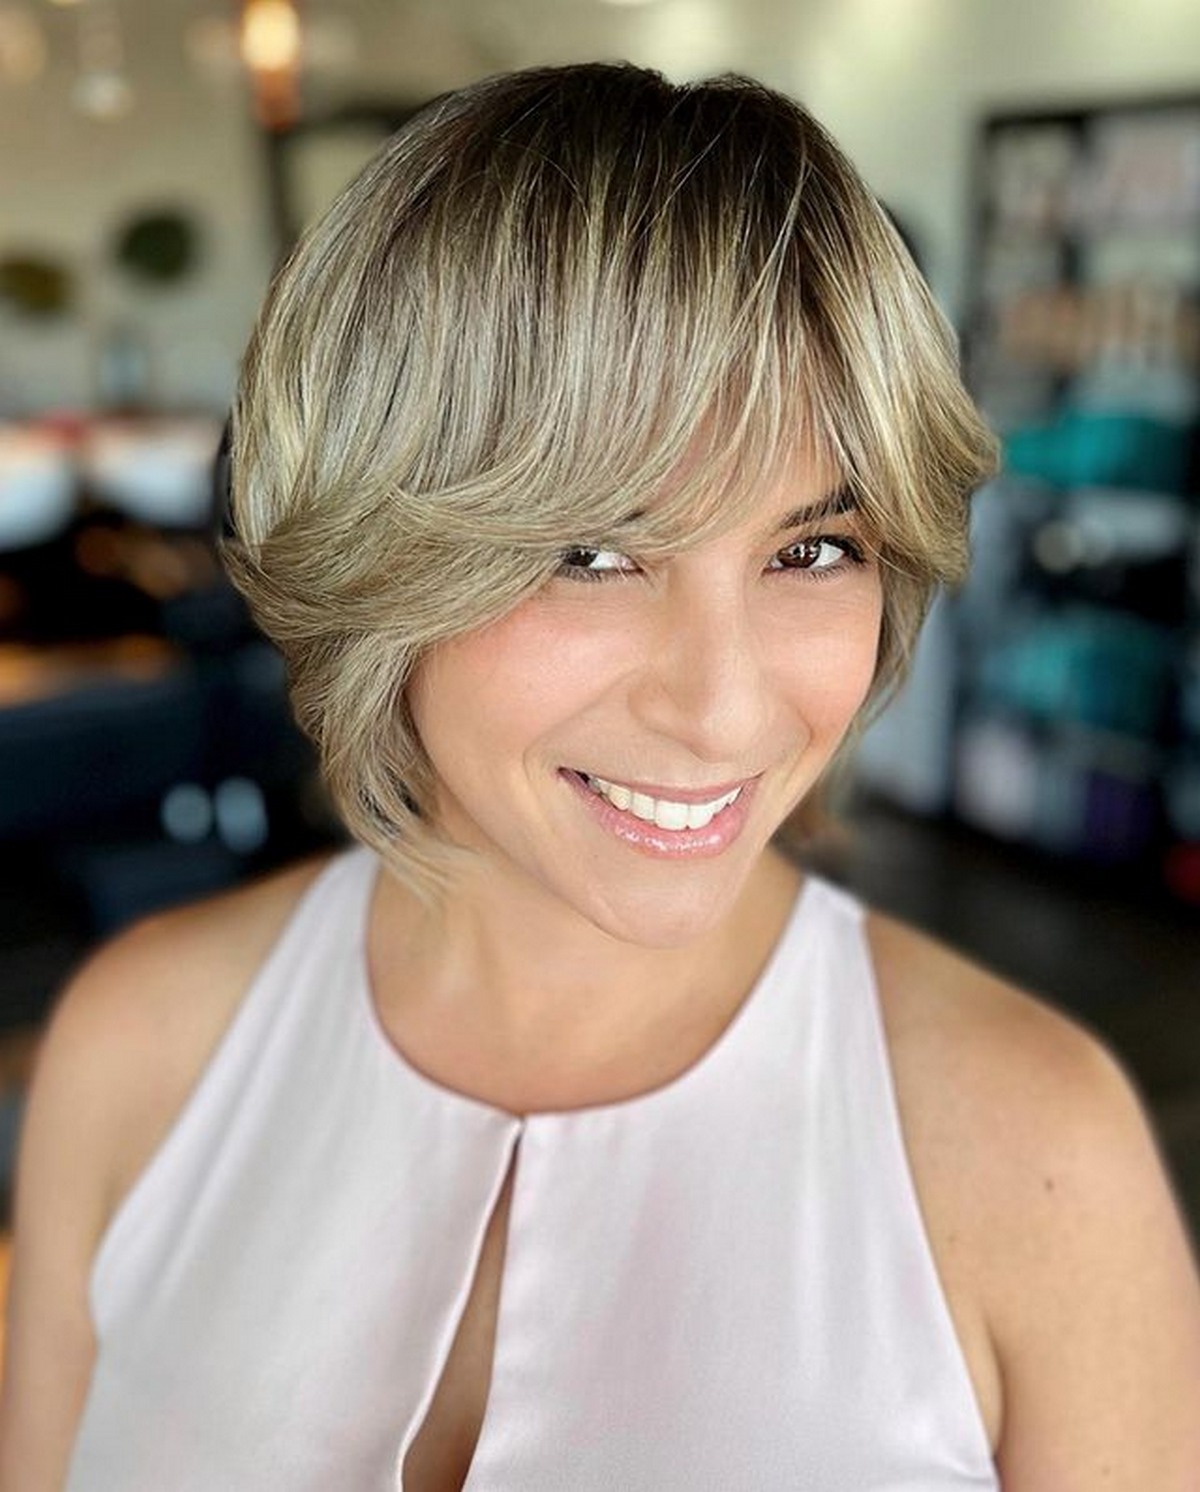 Neat Pixie Haircut With Long Bangs